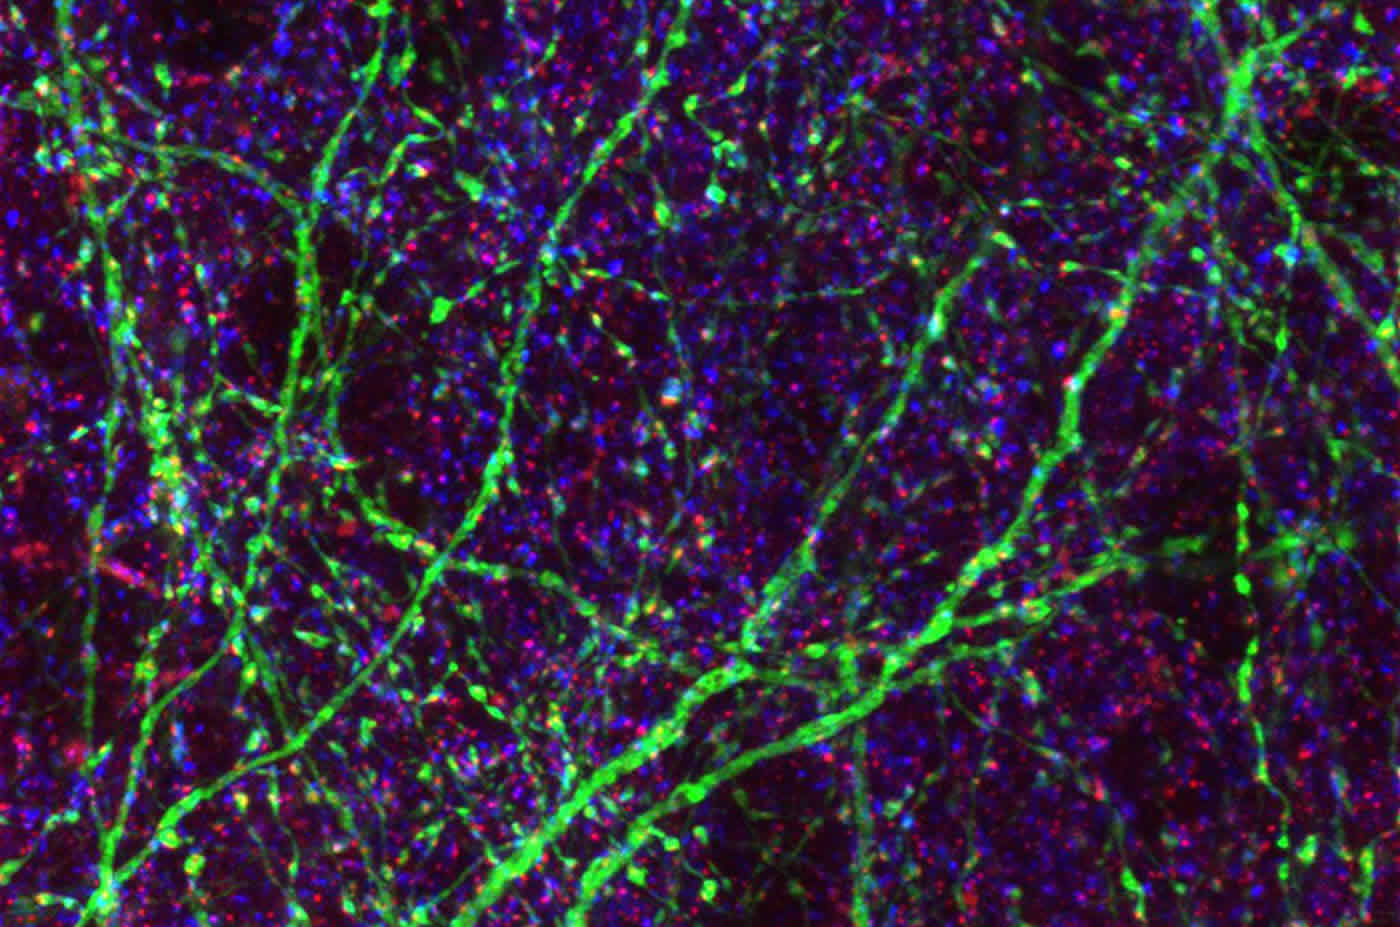 This shows neurons and synapses in purple and green